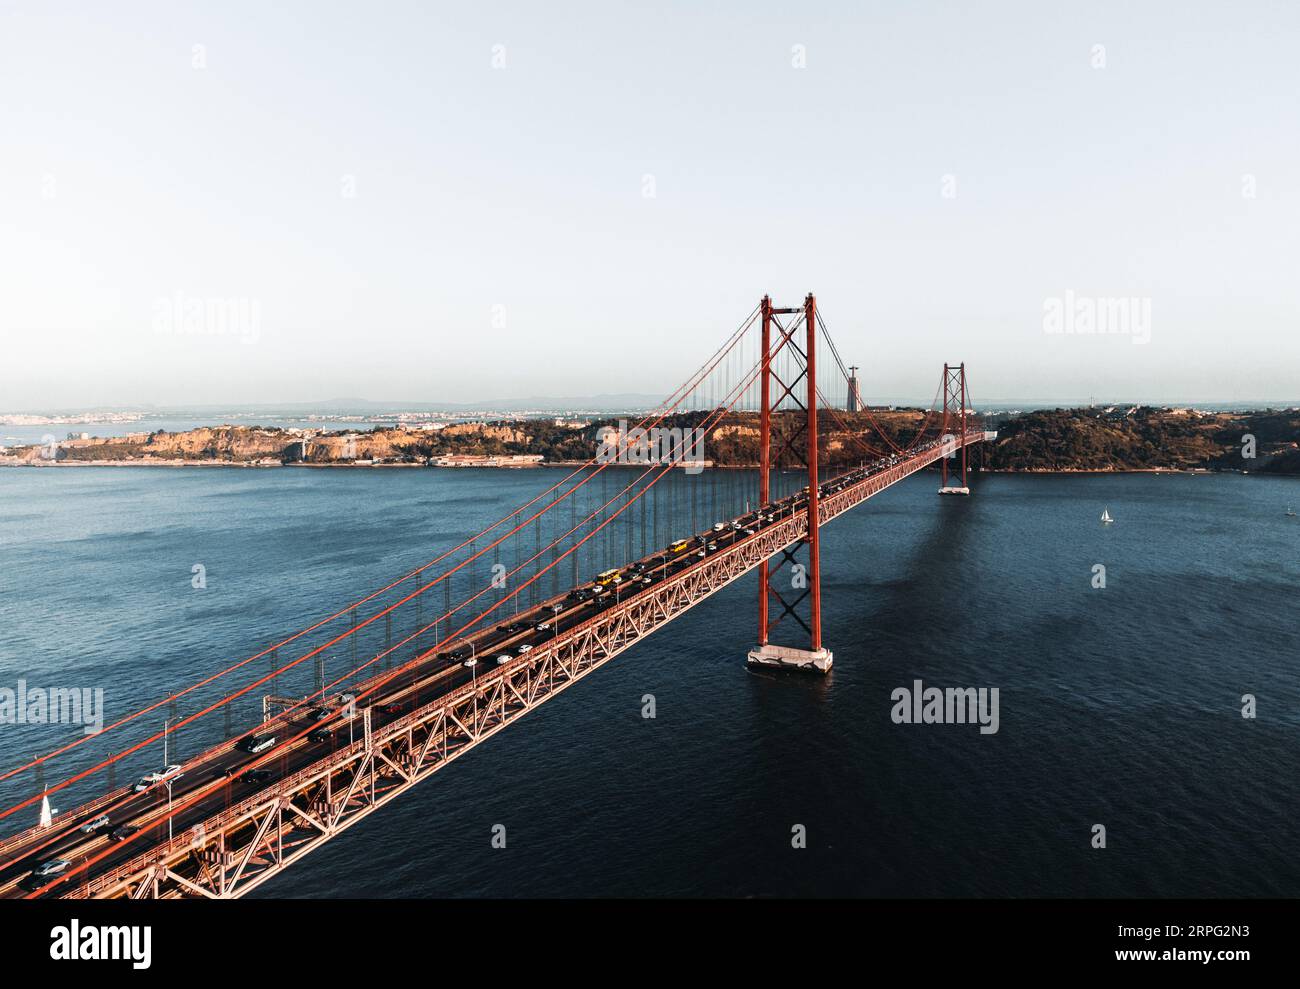 Aerial photos of the 25 April bridge (Ponte 25 de Abril) located in Lisbon, Portugal, crossing the Targus river - taken by drone. Stock Photo